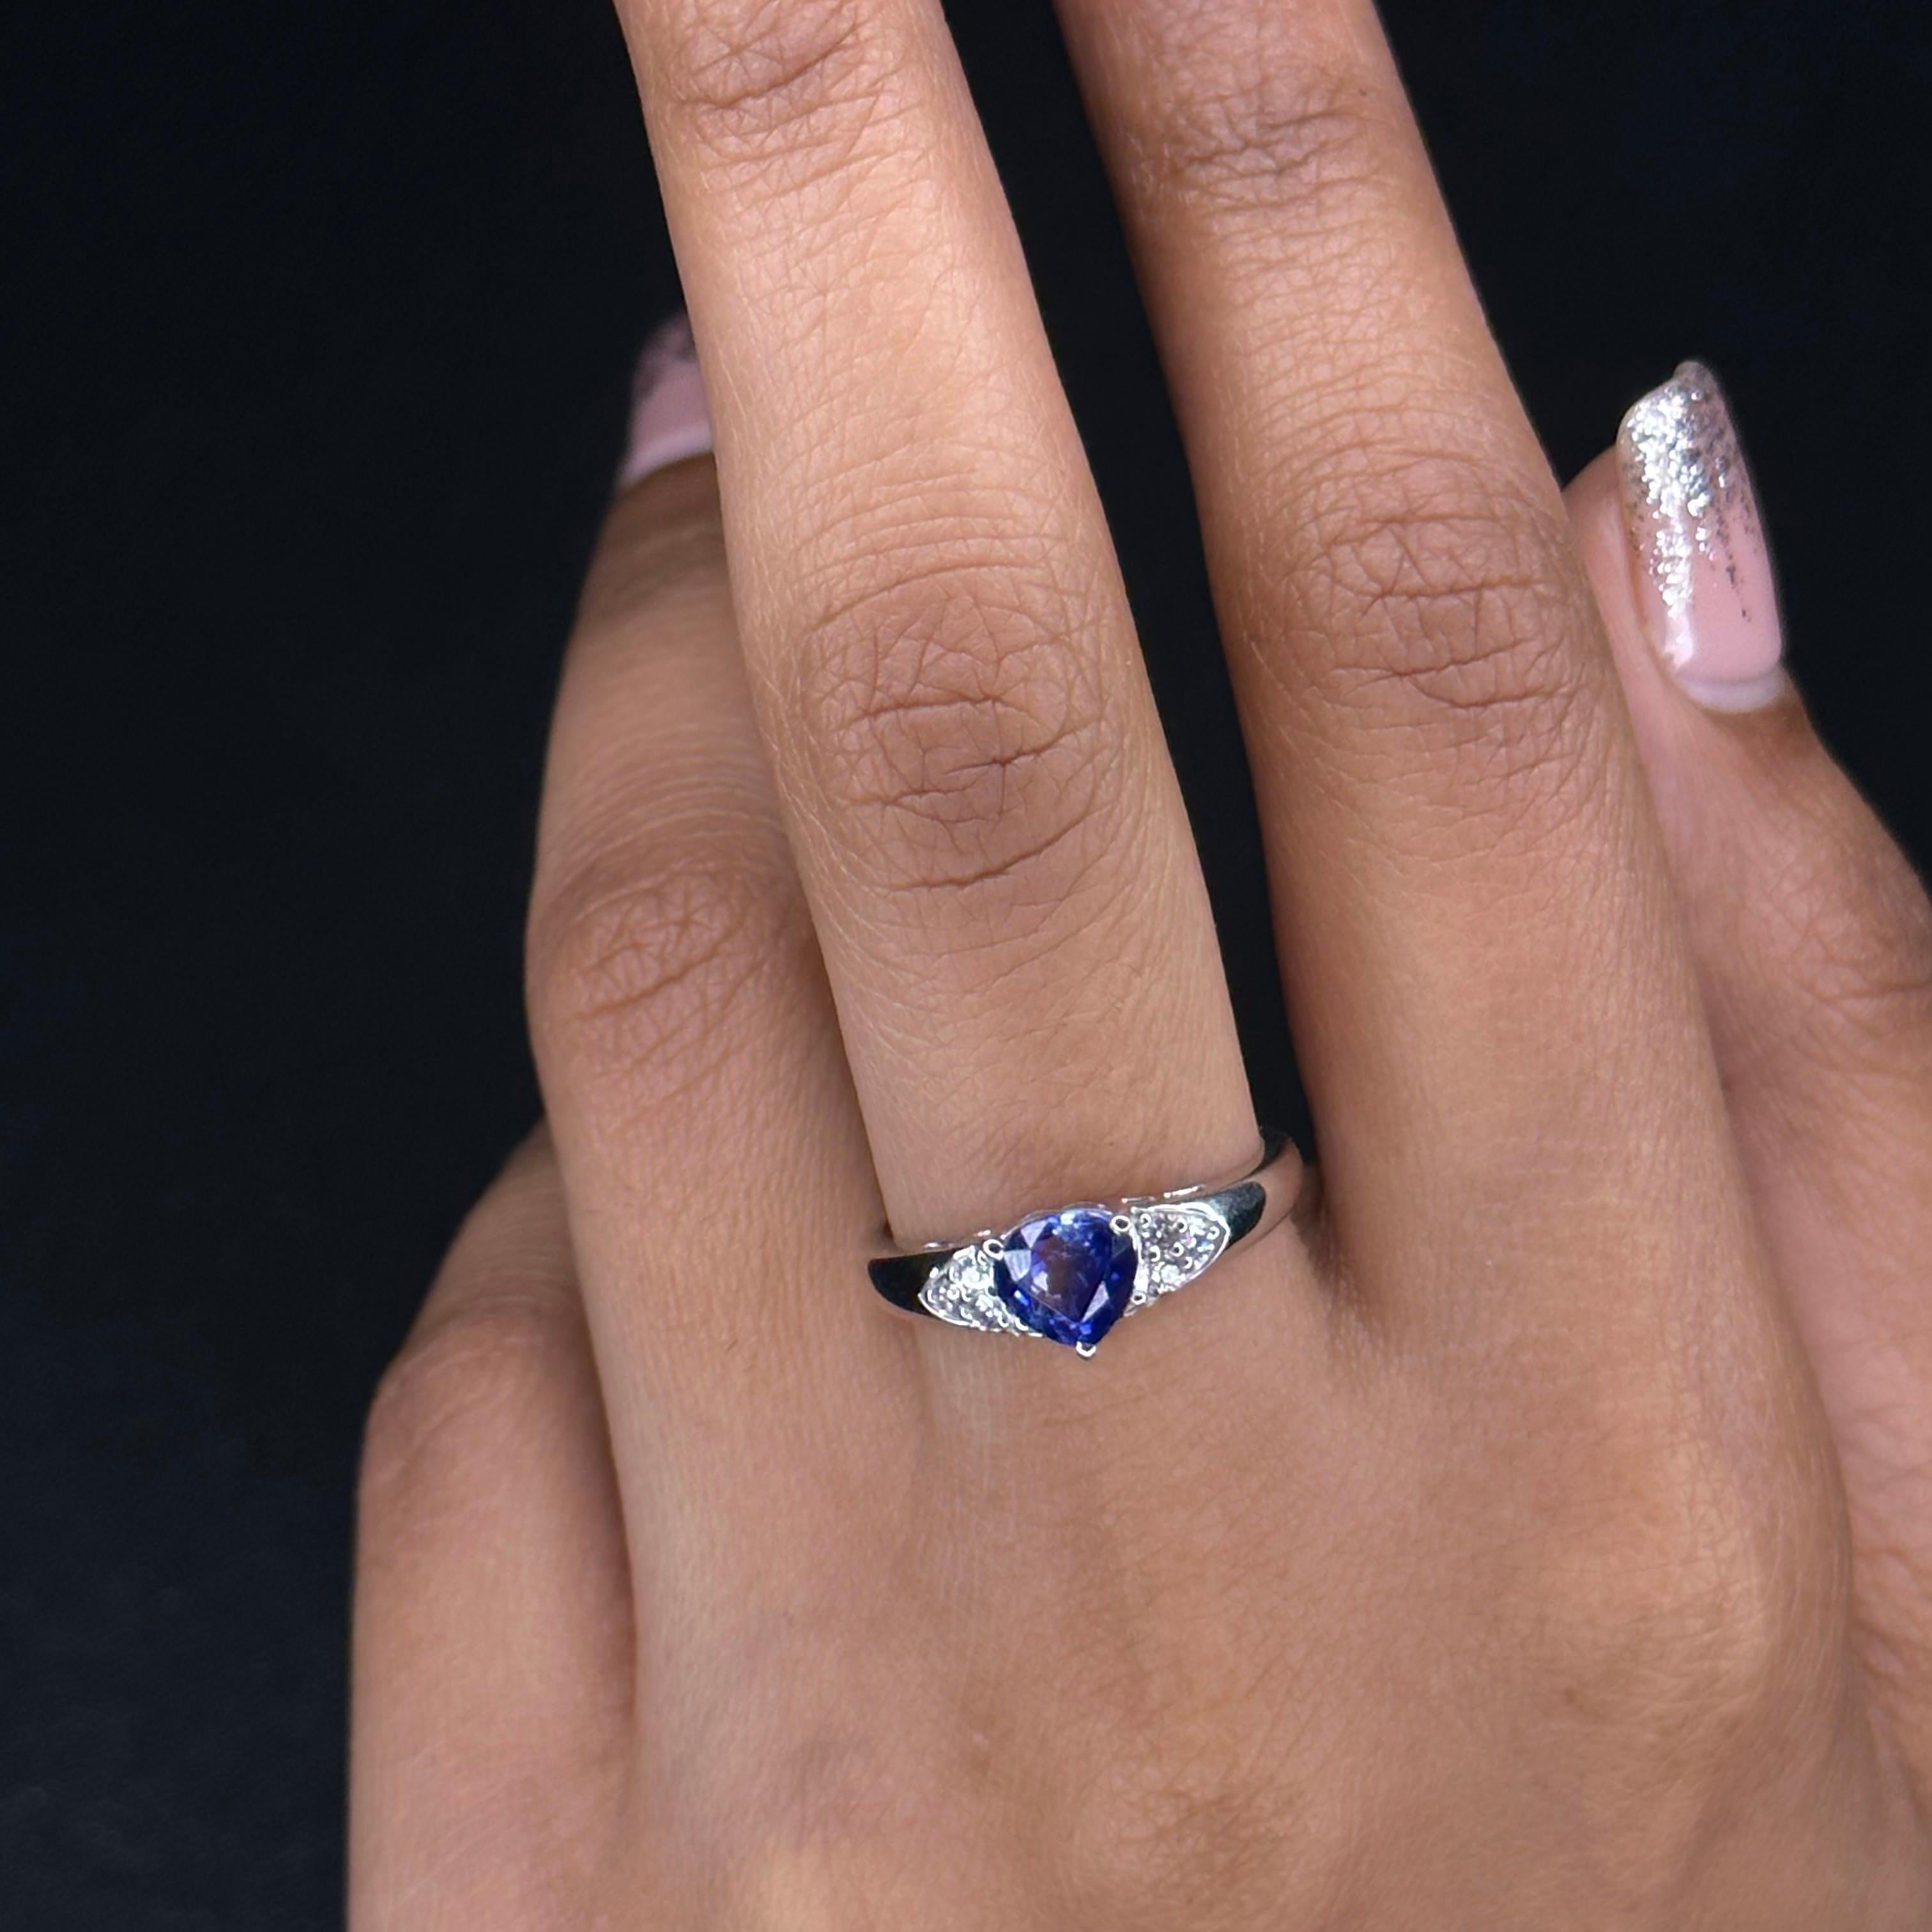 For Sale:  14k White Gold Trillion Cut Sapphire Birthstone Engagement Ring with Diamonds 5